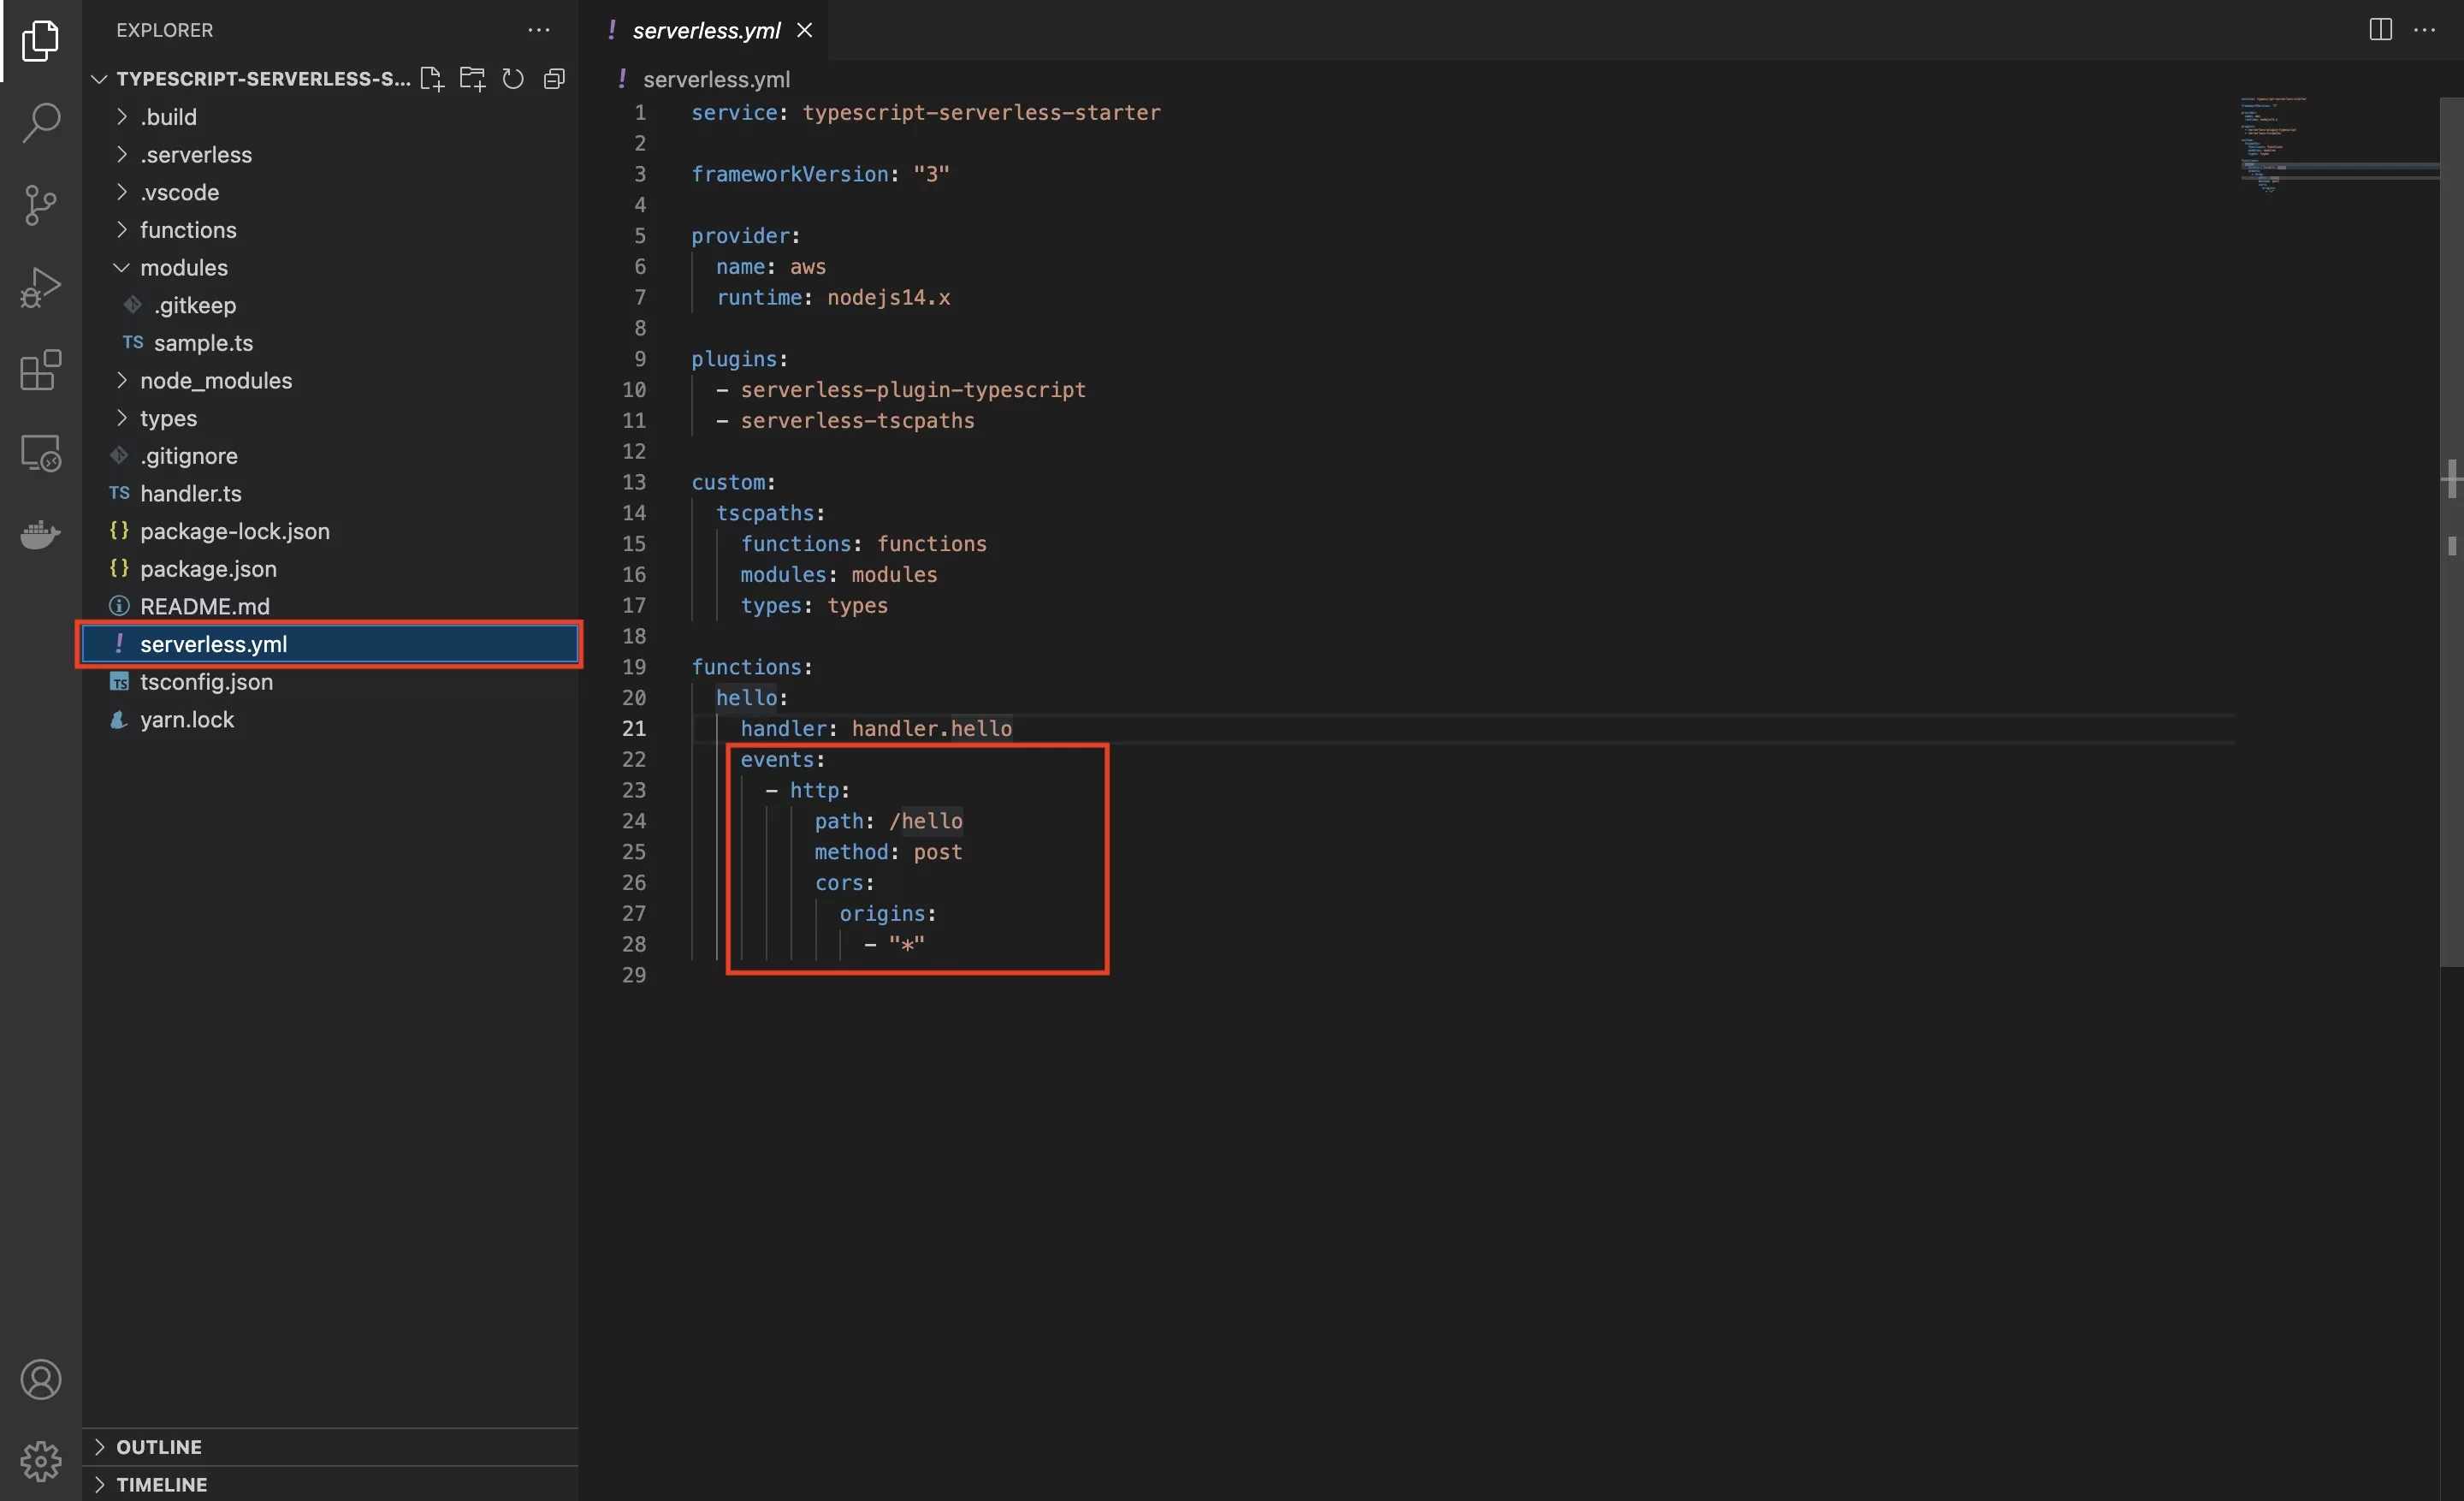 A screenshot of VSCode showing our updated serverless.yml file with the code that's required to convert a function into an API. Code sample provided below.